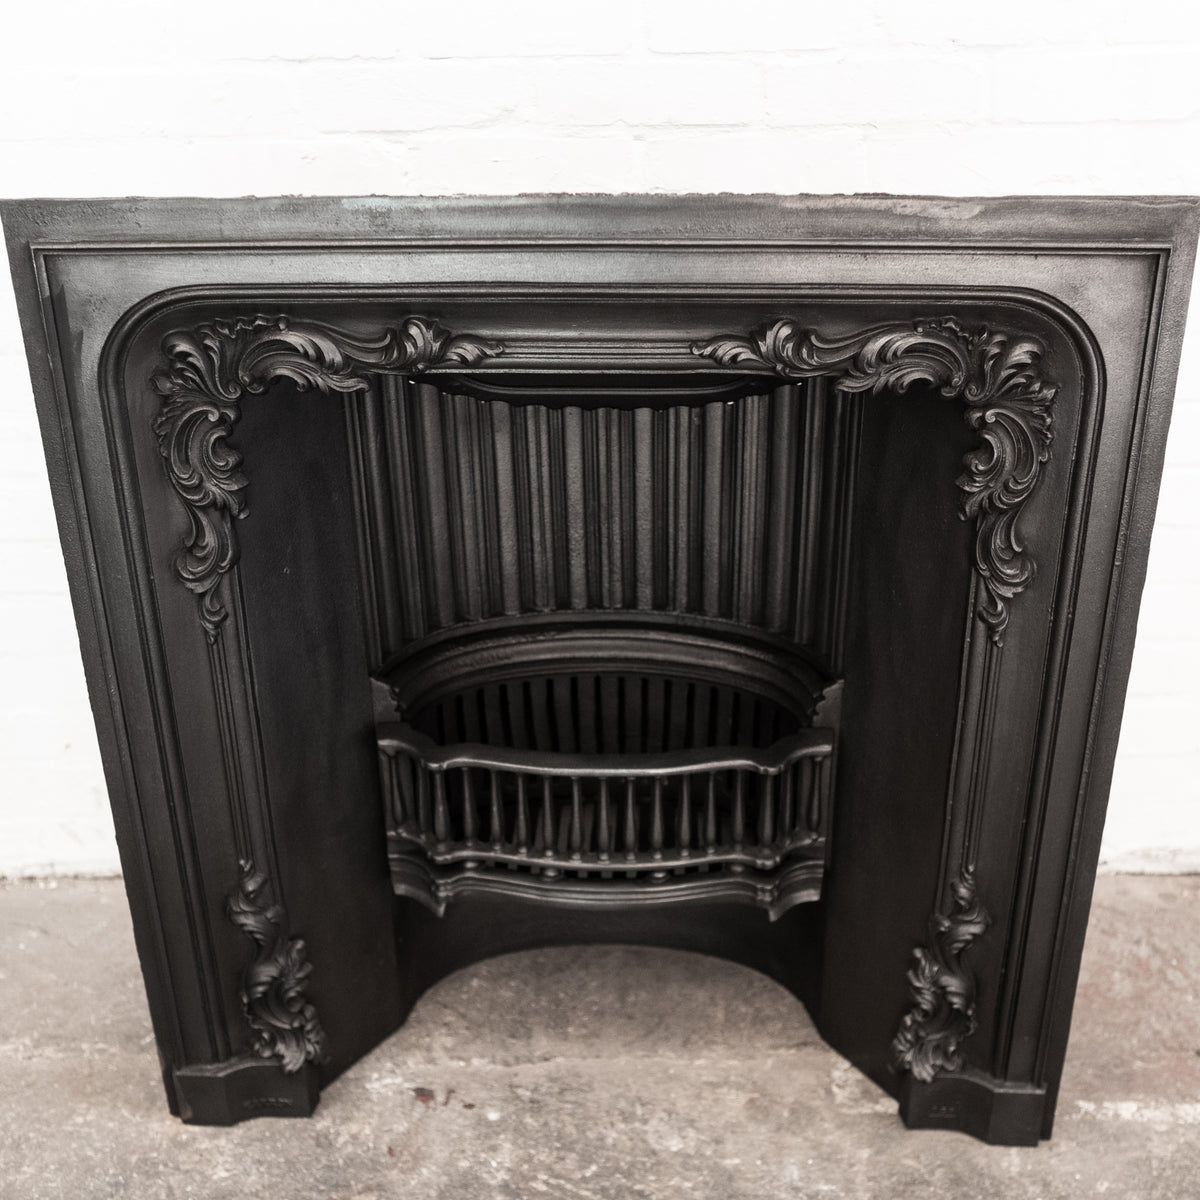 Antique Ornate Cast Iron Fireplace Insert | The Architectural Forum